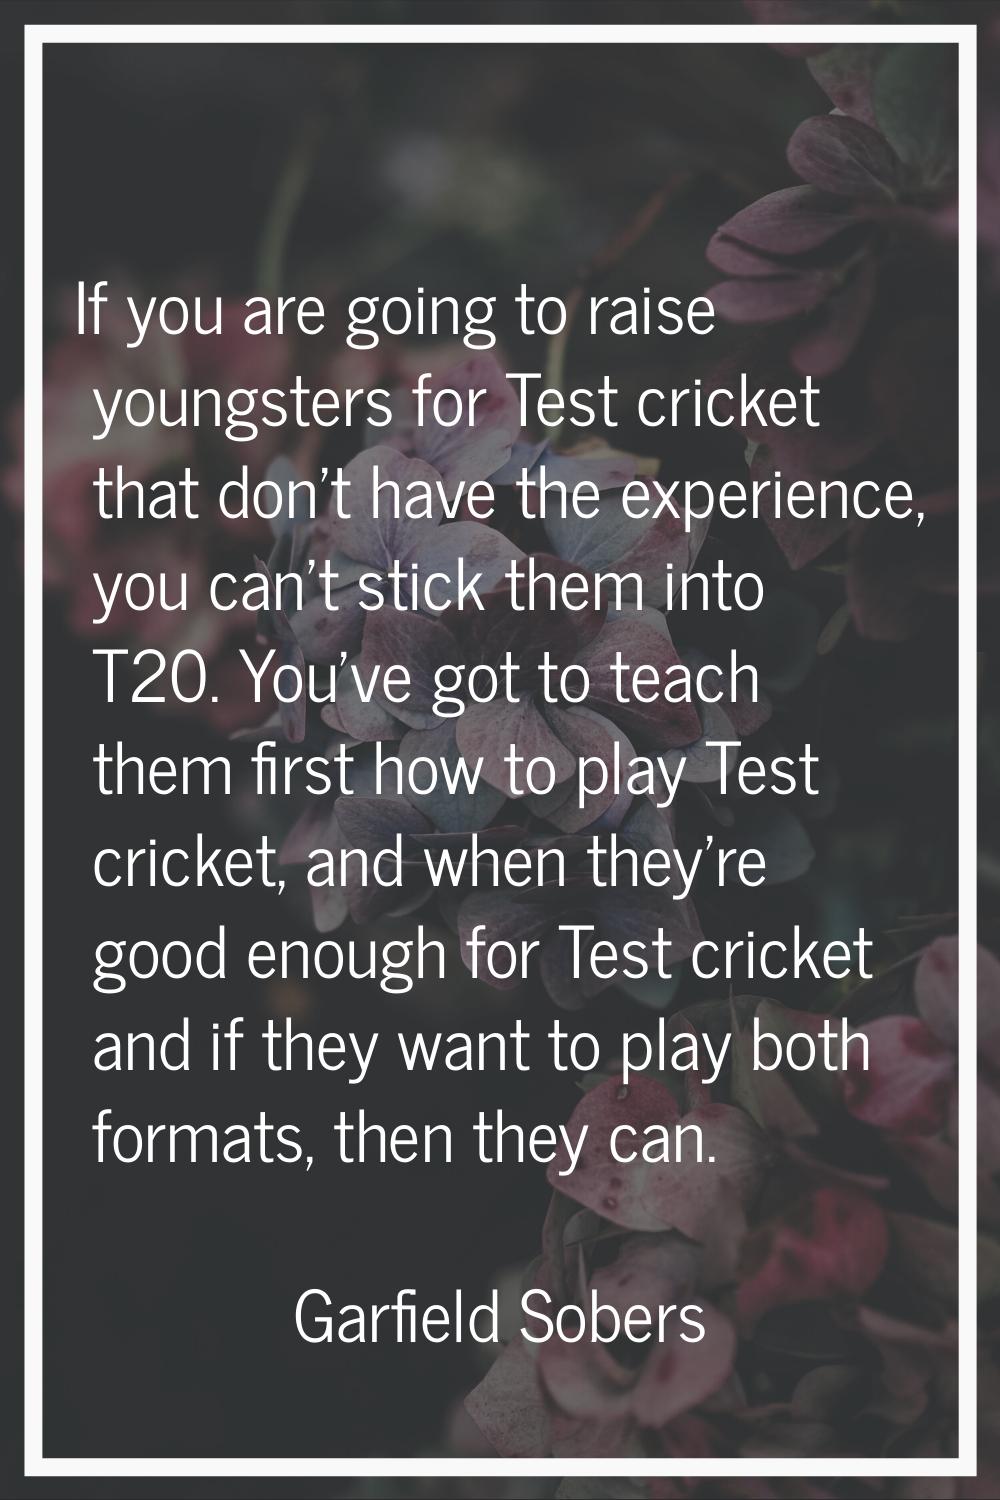 If you are going to raise youngsters for Test cricket that don't have the experience, you can't sti